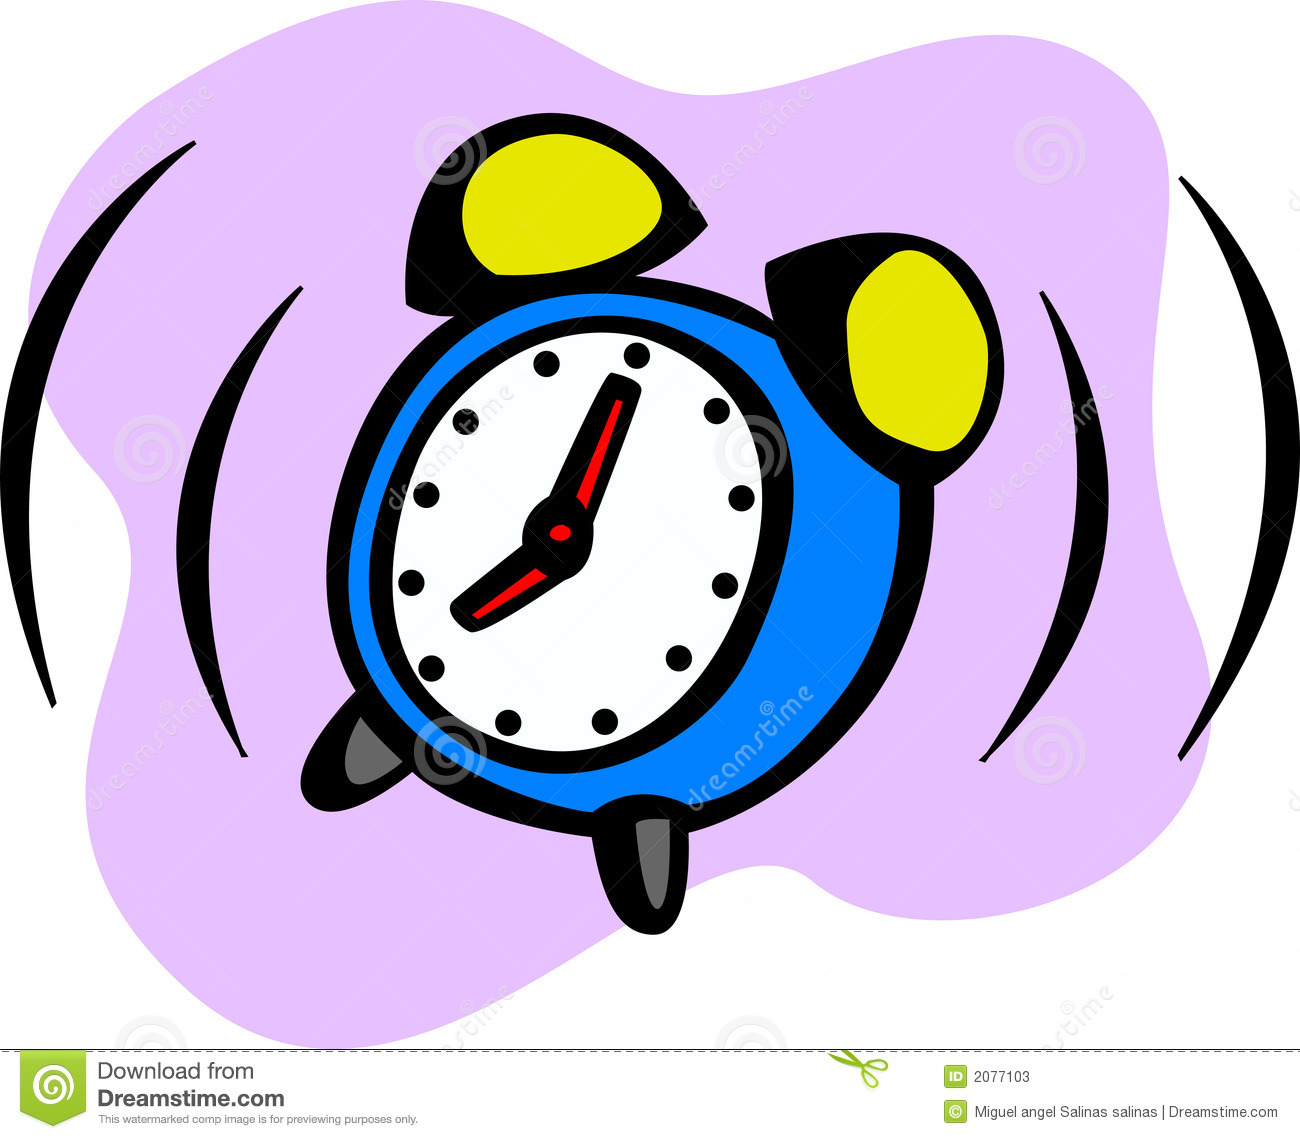 Clock Clipart Black And White   Clipart Panda   Free Clipart Images